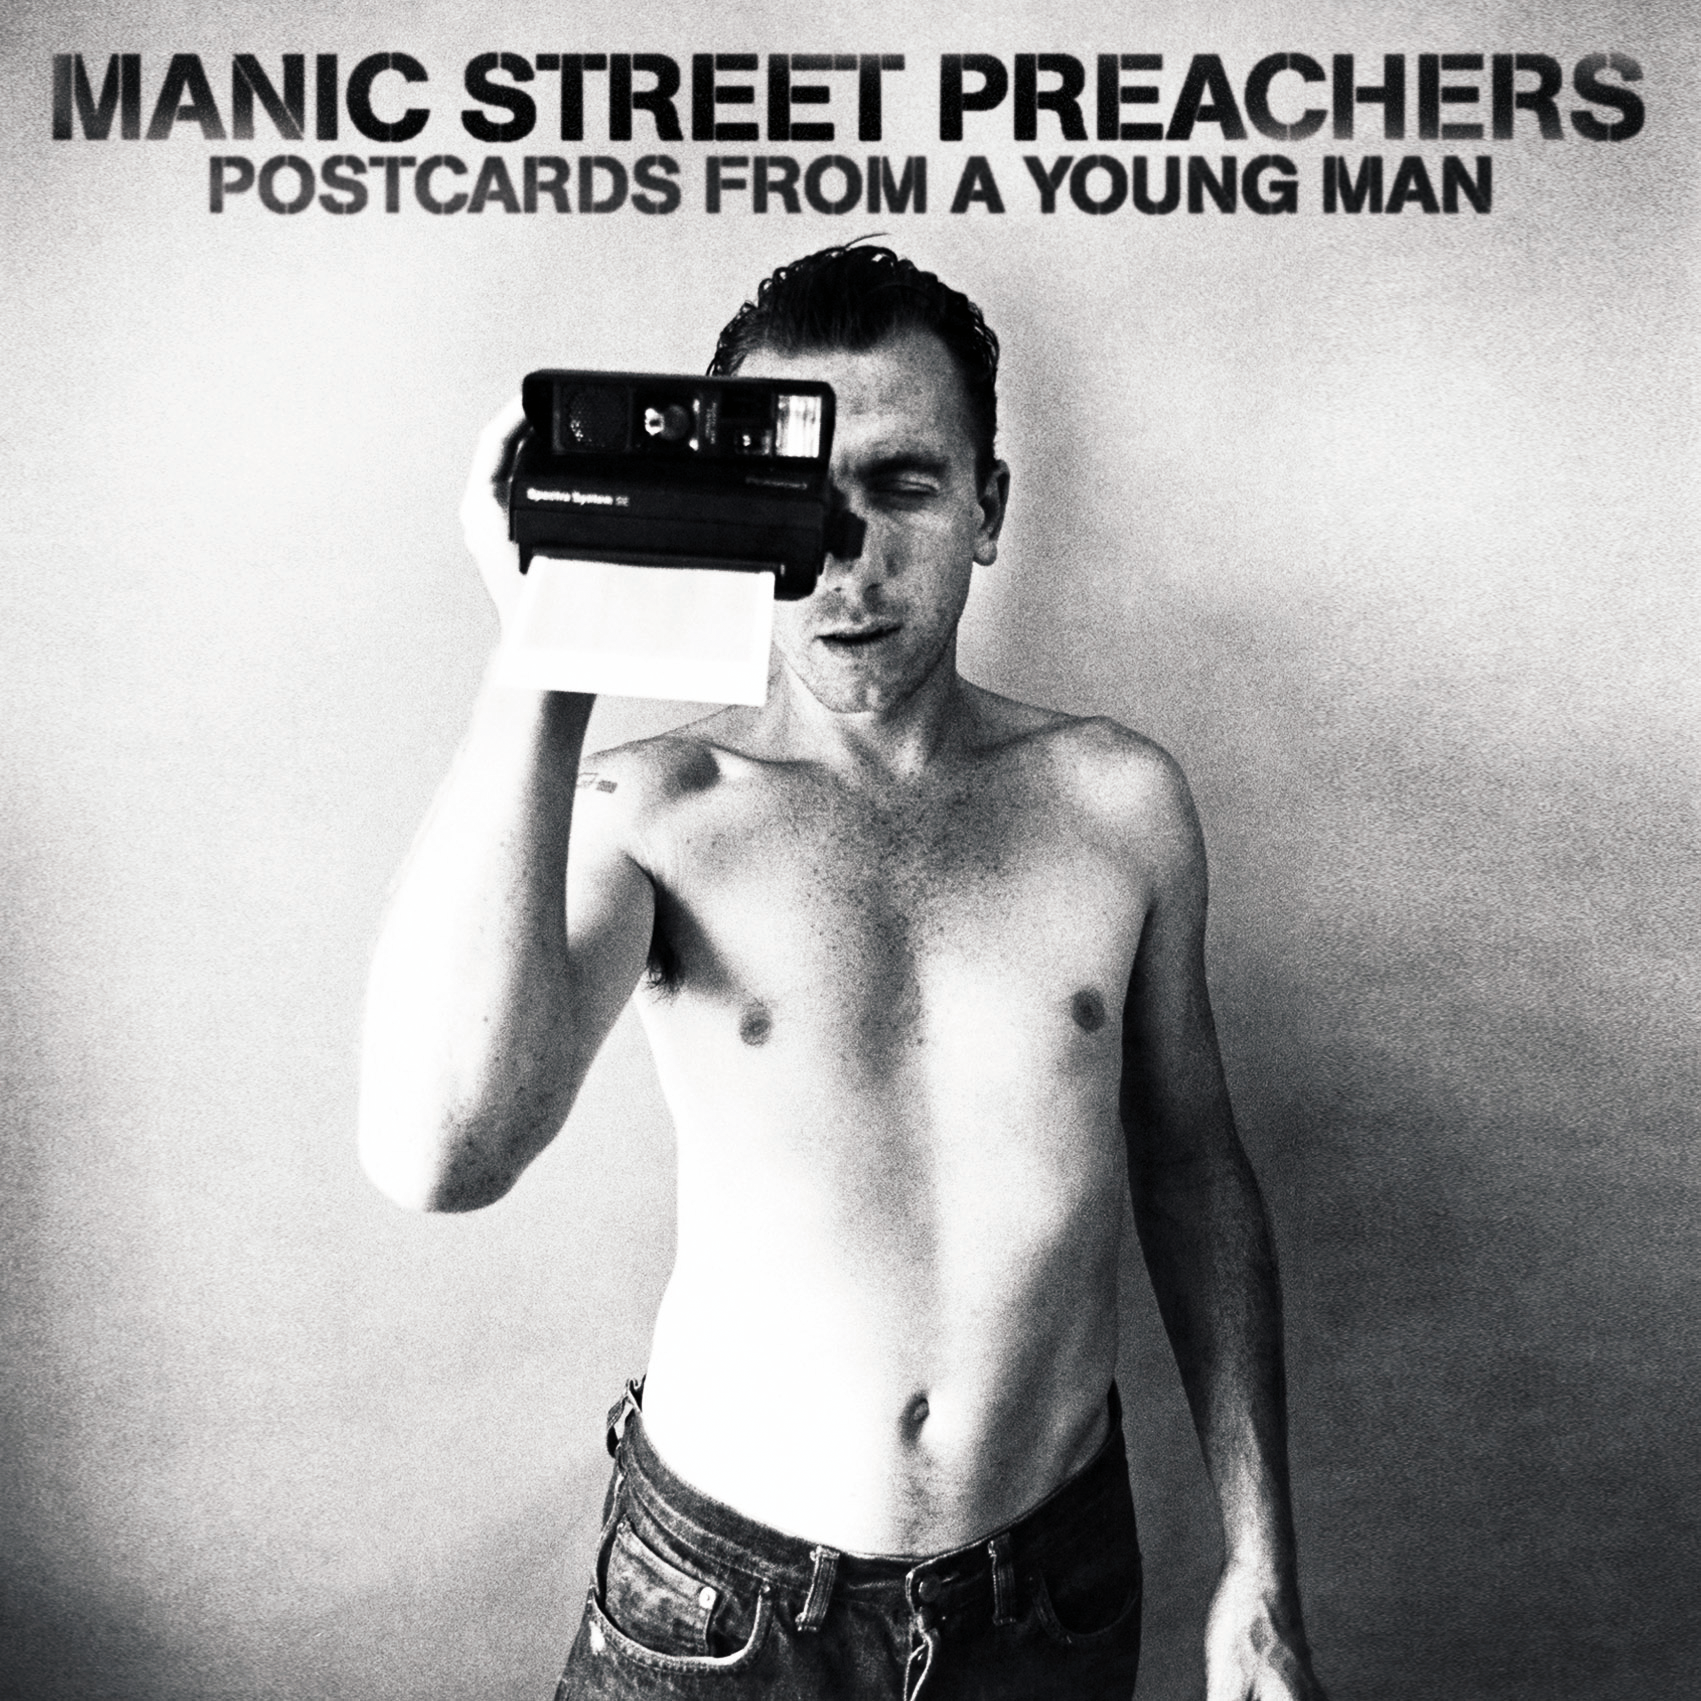 Manic Street Preachers-Postcards From A Young Man-16BIT-WEB-FLAC-2010-ENRiCH Download